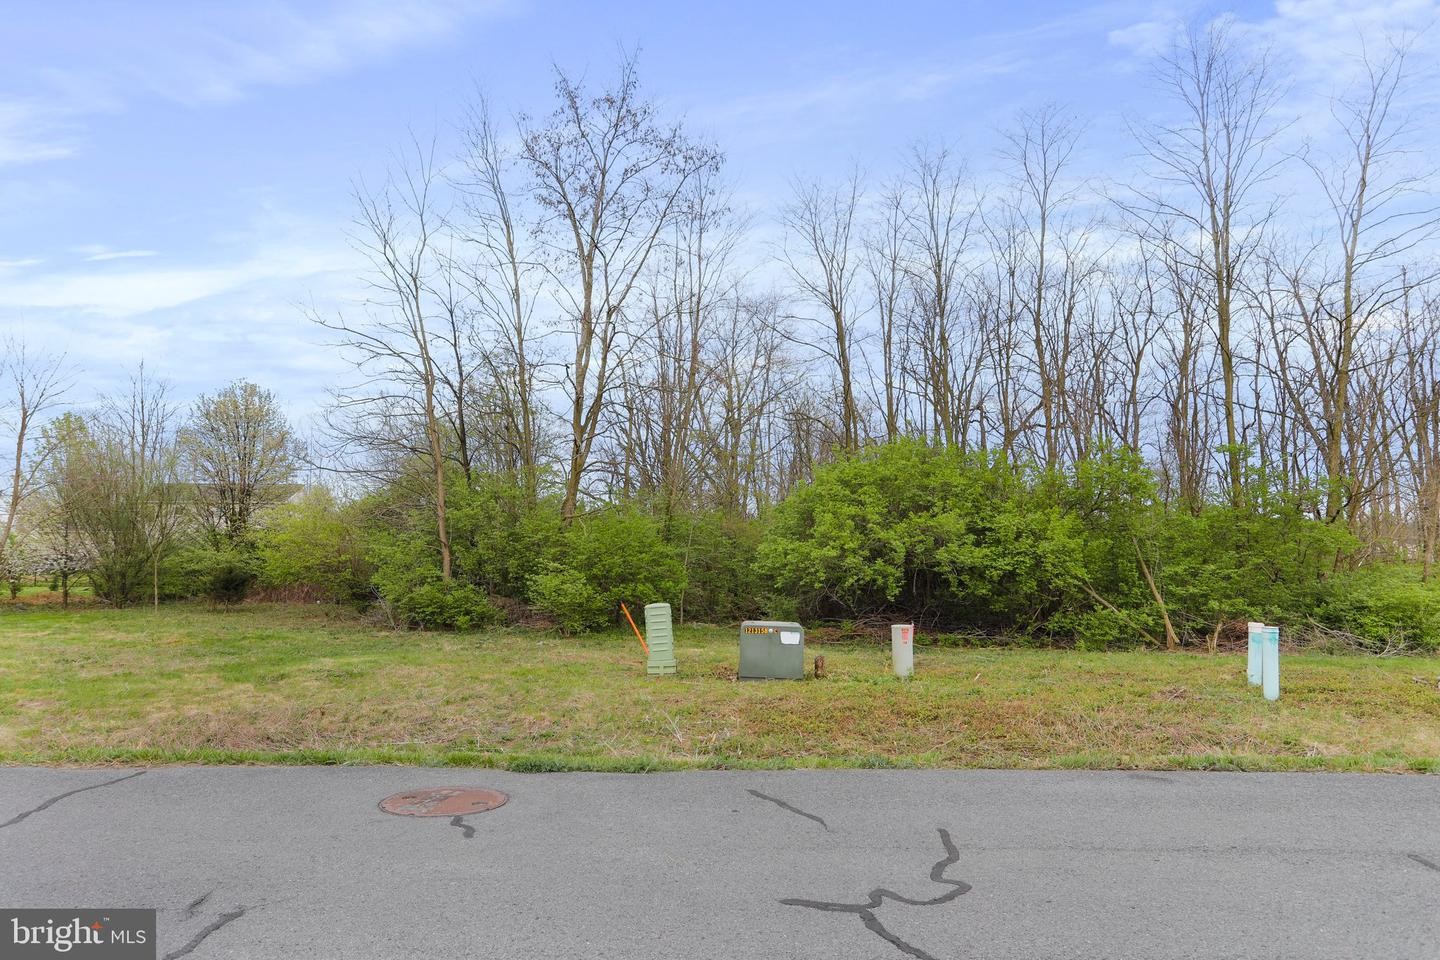 3. Lot 66 Wedgewood Dr